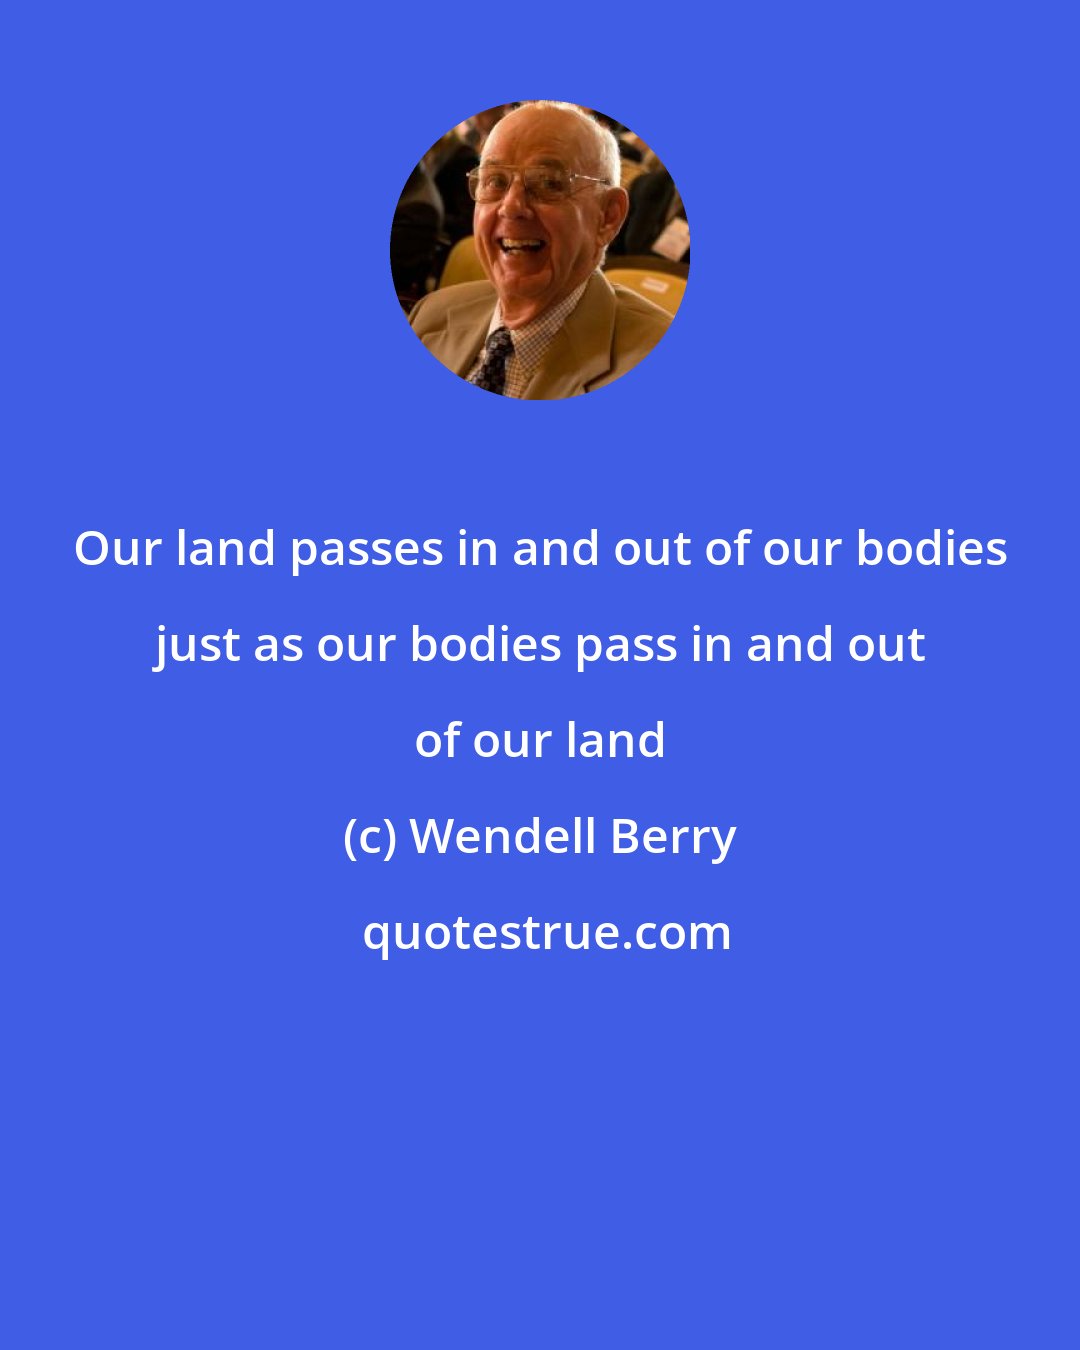 Wendell Berry: Our land passes in and out of our bodies just as our bodies pass in and out of our land